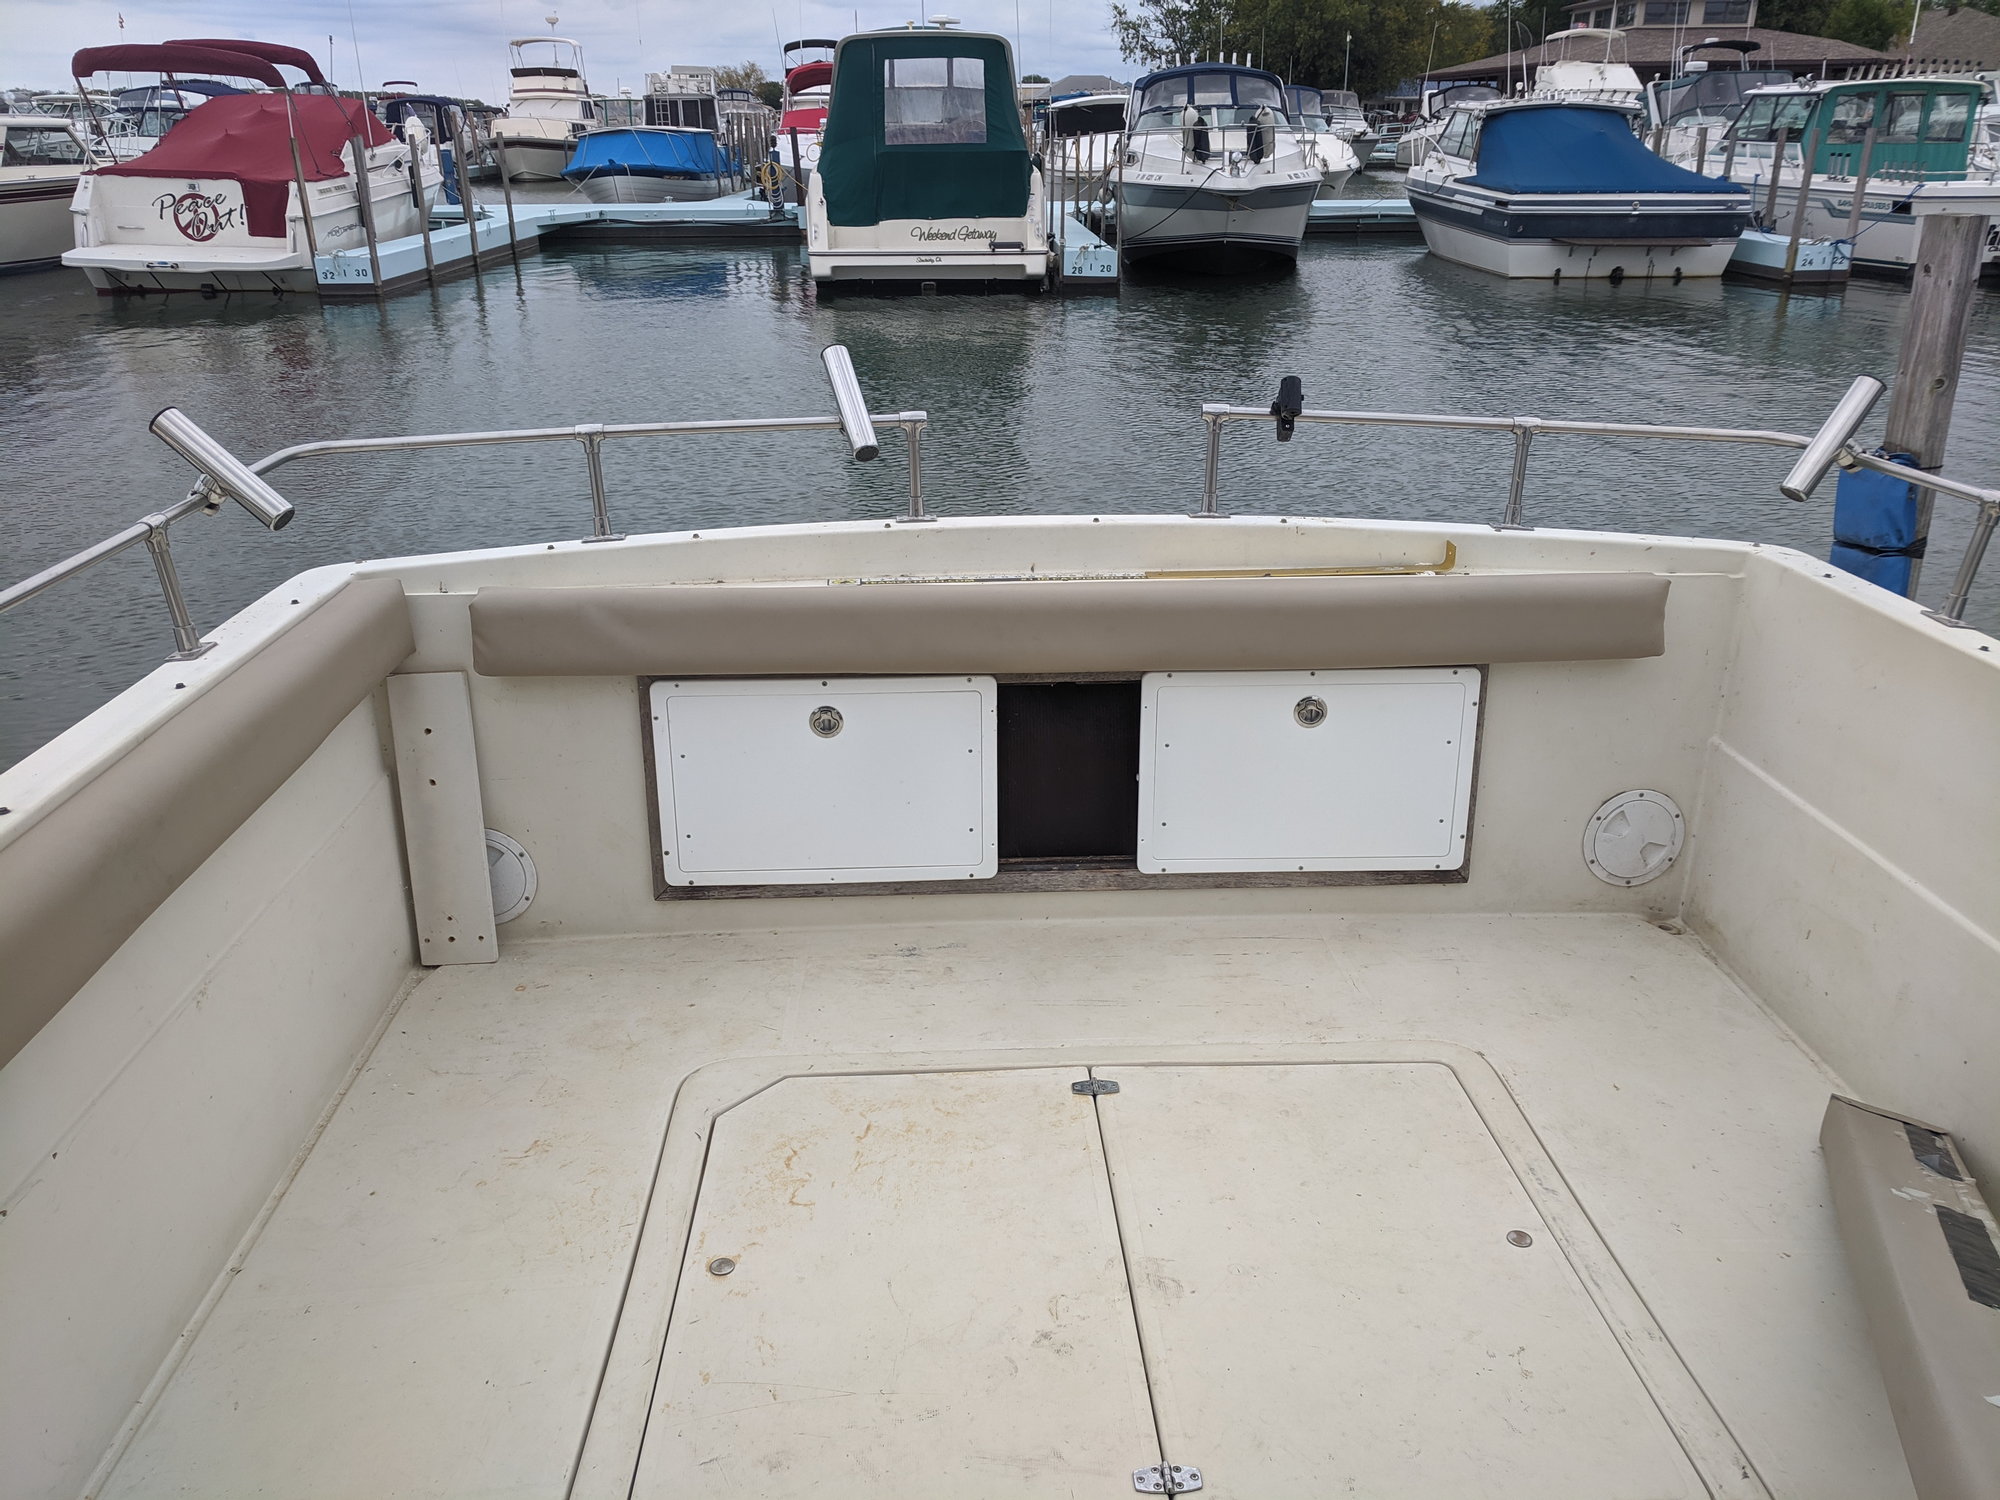 Transom rod holder - The Hull Truth - Boating and Fishing Forum